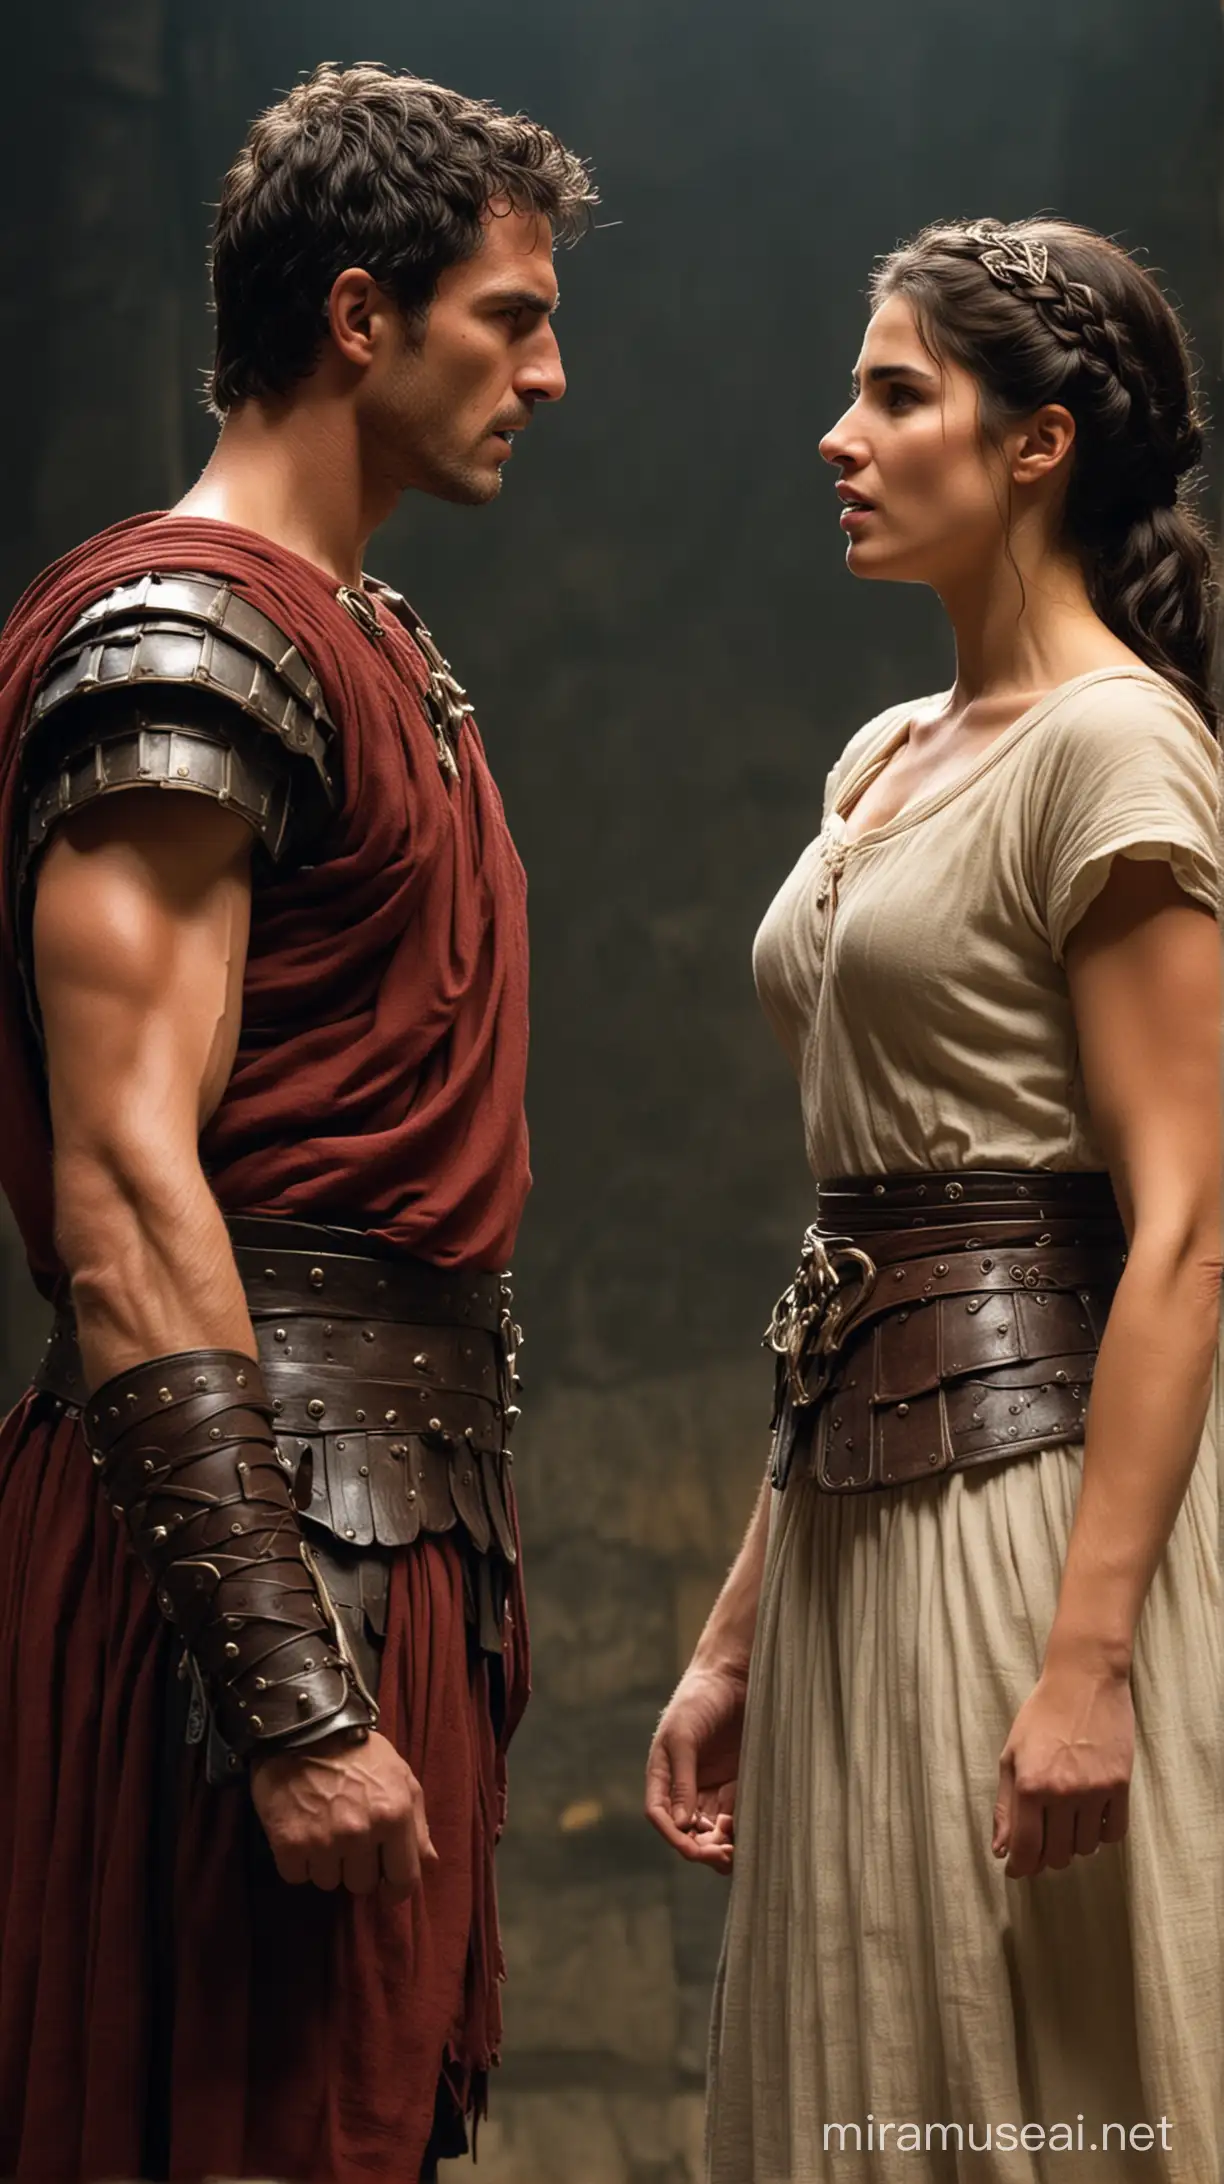 Show Octavia and Mark Antony in heated arguments or confrontations, with tensions running high between them in a moody background